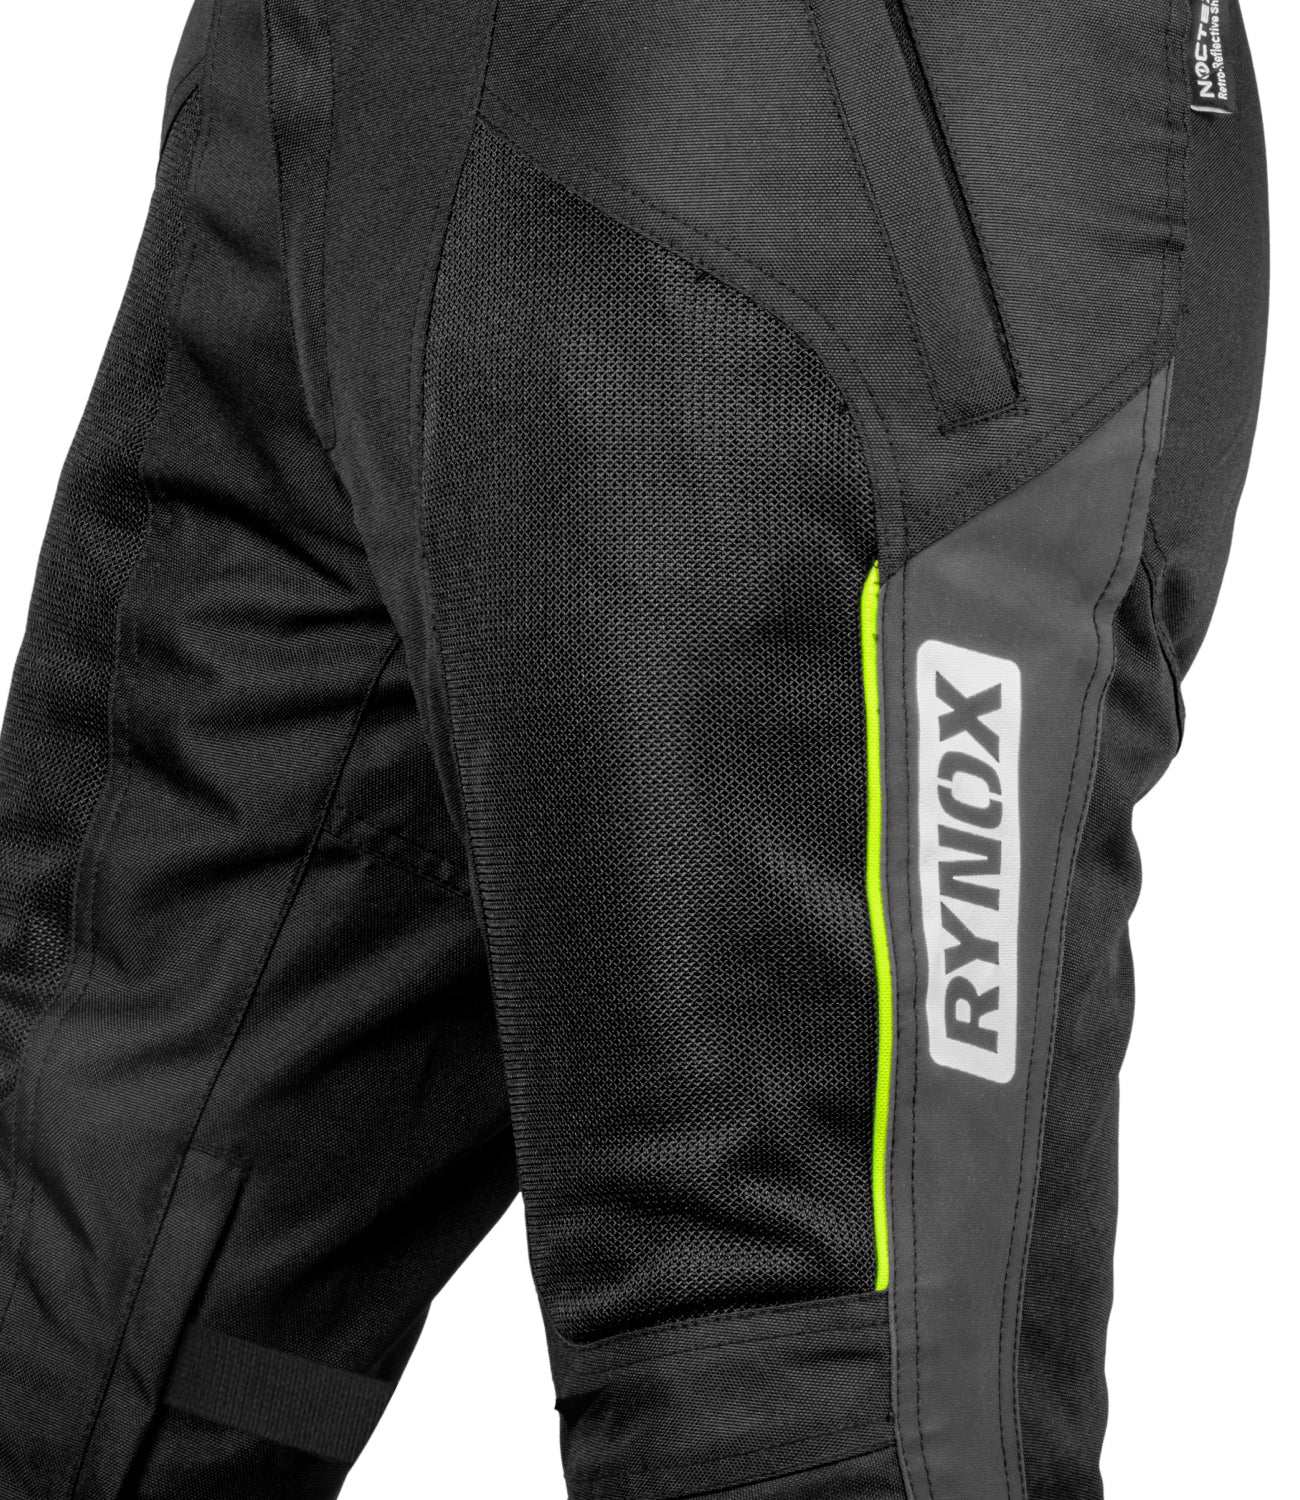 RYNOX Gears - ADVENTO from RYNOX Gears - The All Season Armoured Riding  Pants. The Rynox Armoured Riding Pants include features exclusively  designed by Rynox keeping rider comfort and safety at the